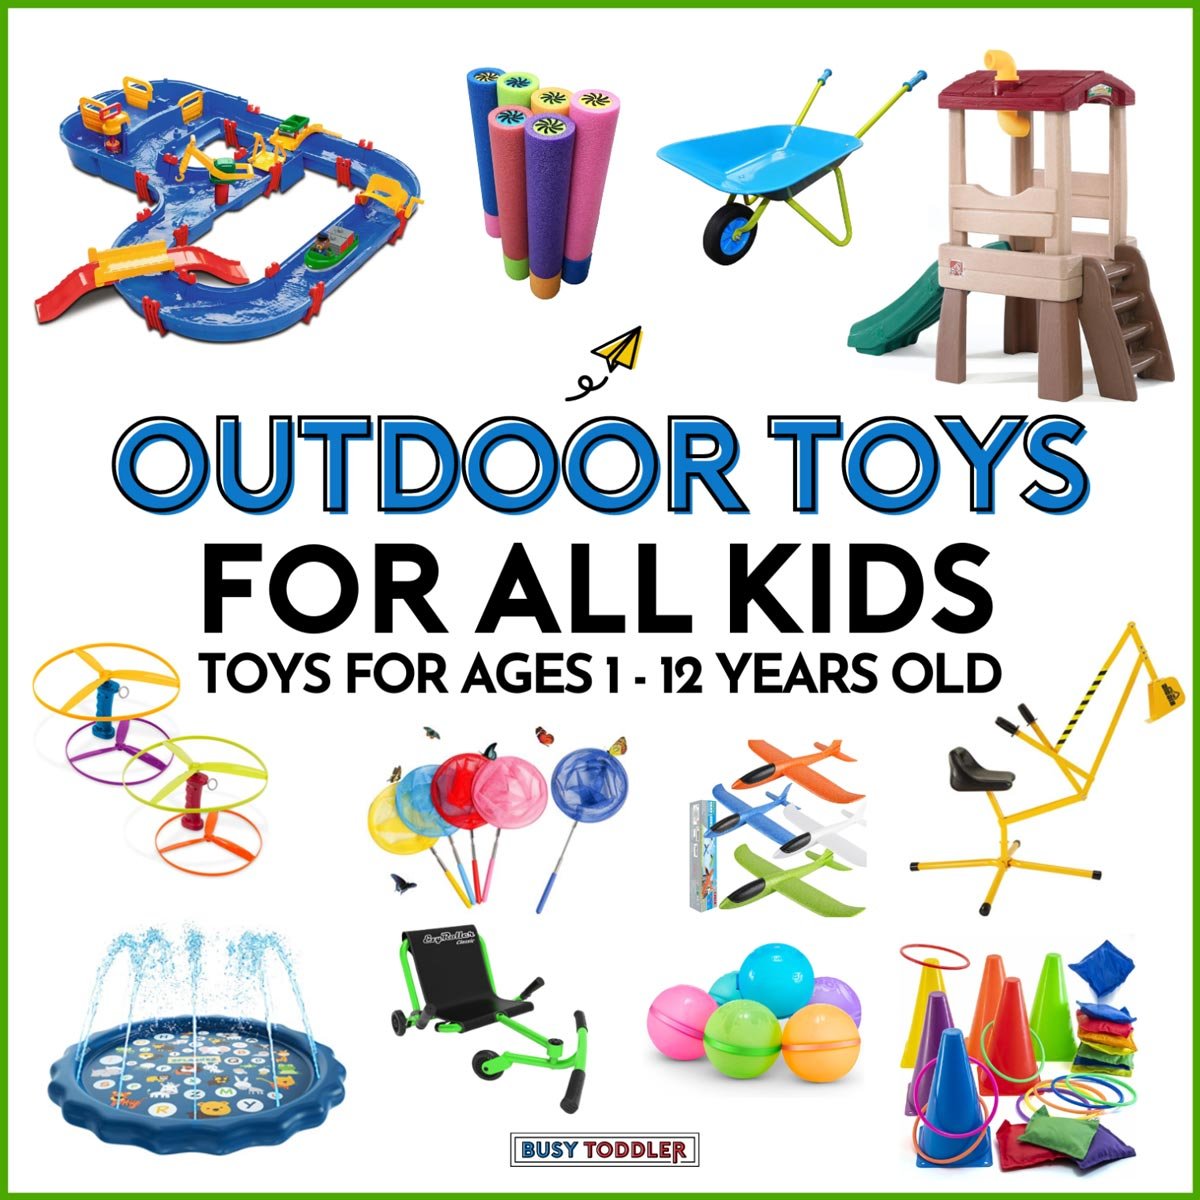 Outdoor Toys for All Ages: toys for ages 1-12 years olds